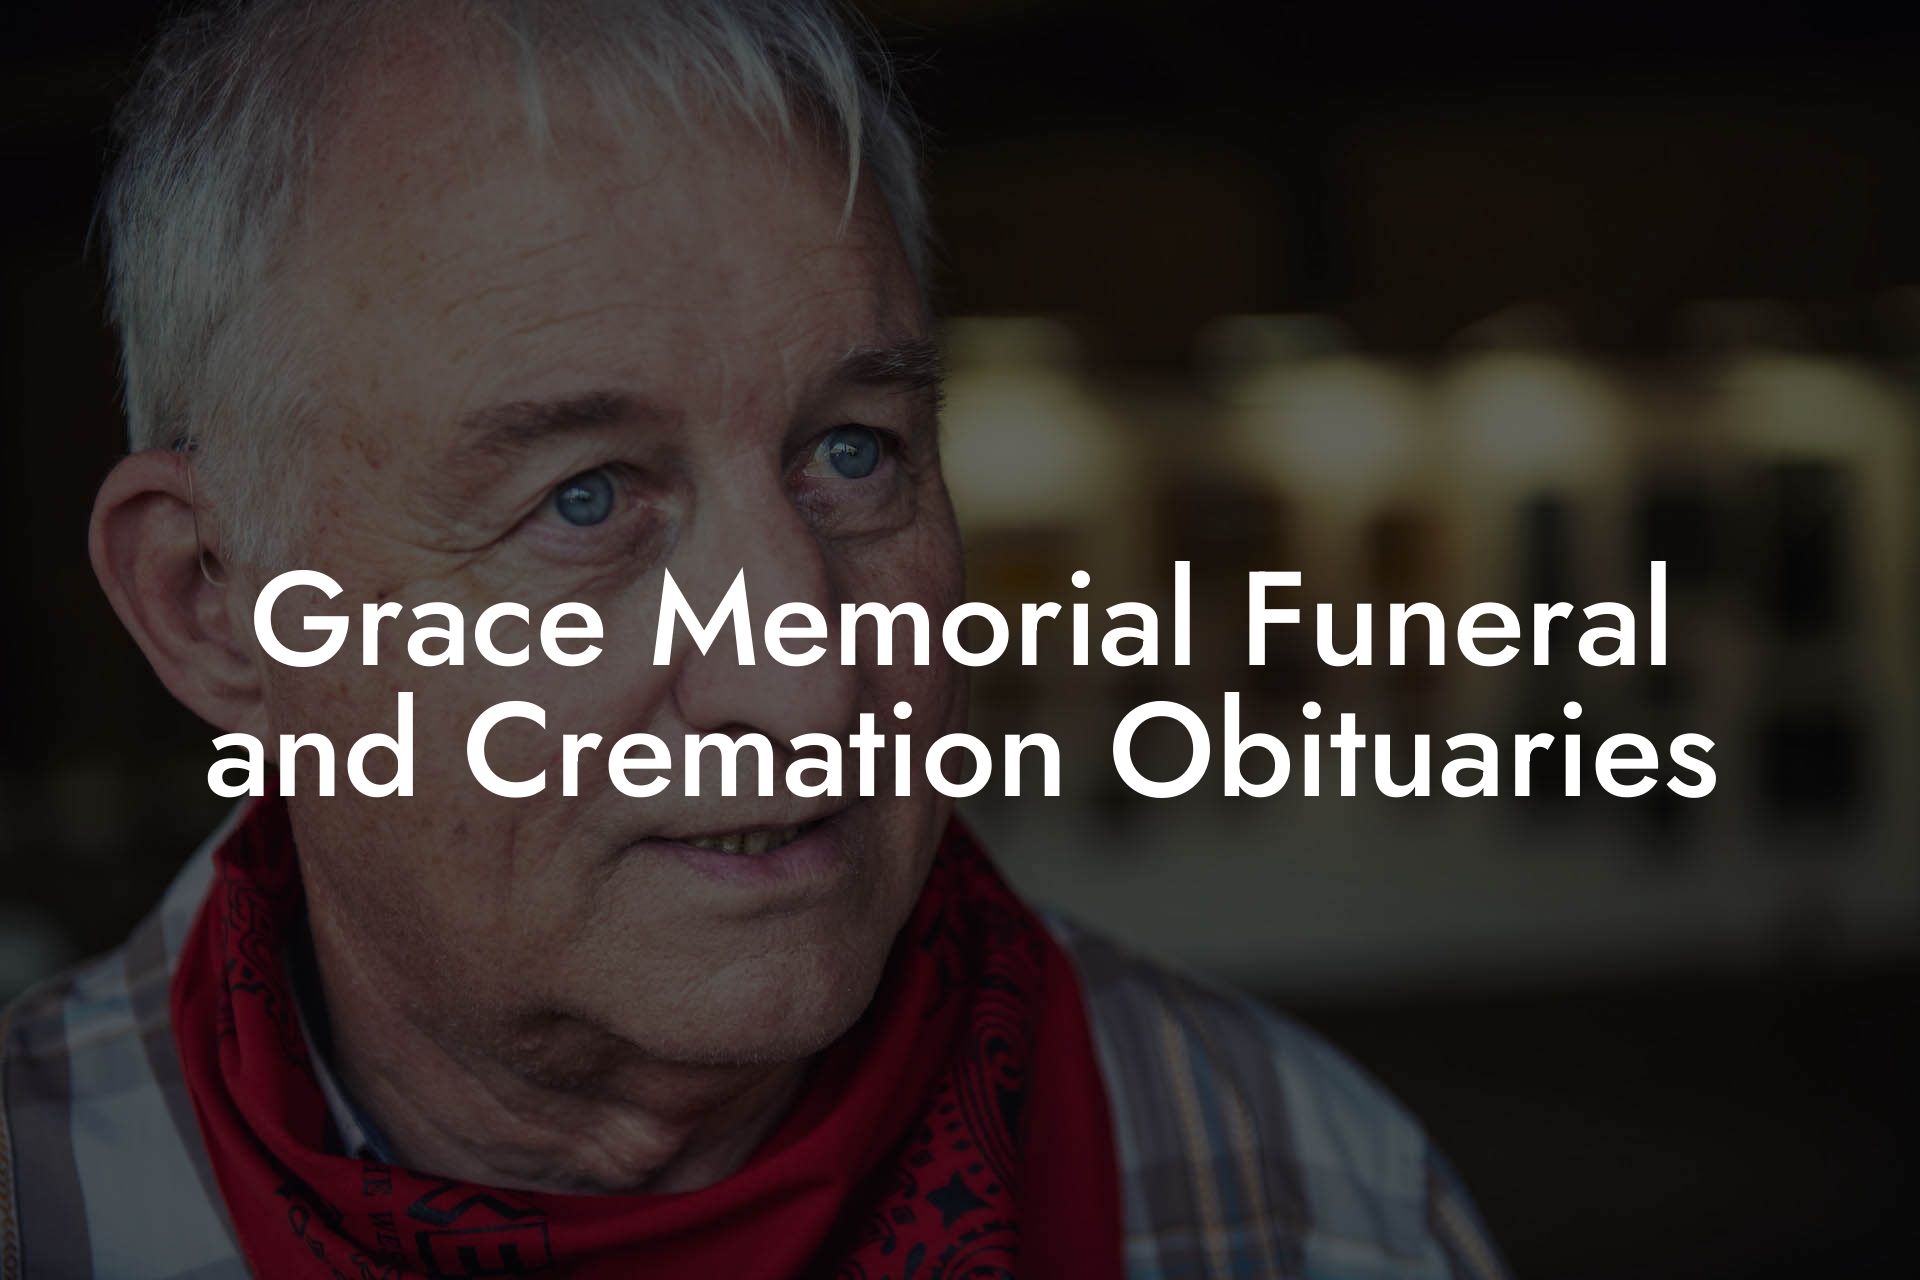 Grace Memorial Funeral and Cremation Obituaries